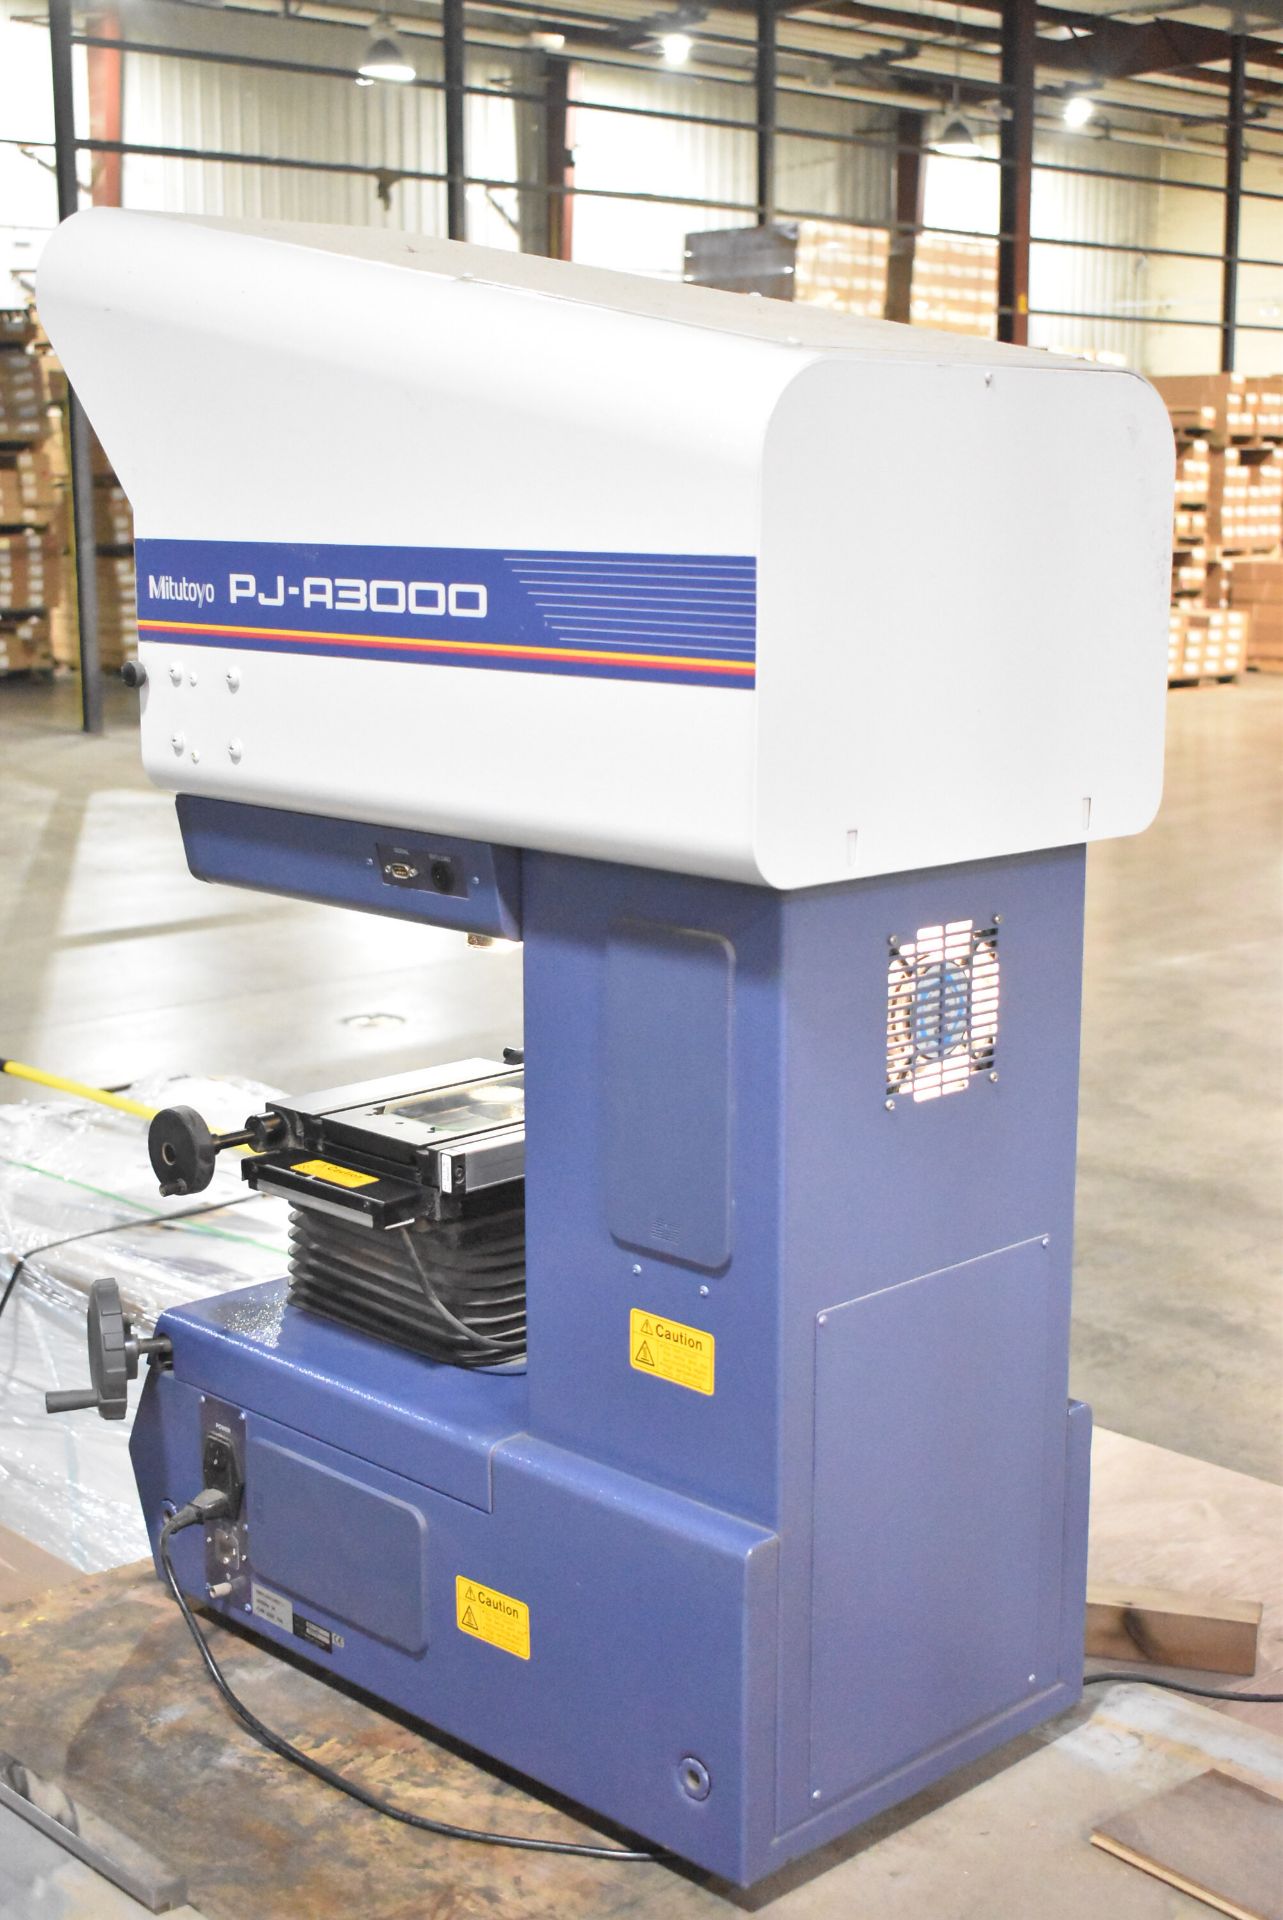 MITUTOYO PJ-A3000 13.5" OPTICAL COMPARATOR WITH BUILT IN 2-AXIS DRO, S/N: 360110 - Image 3 of 8